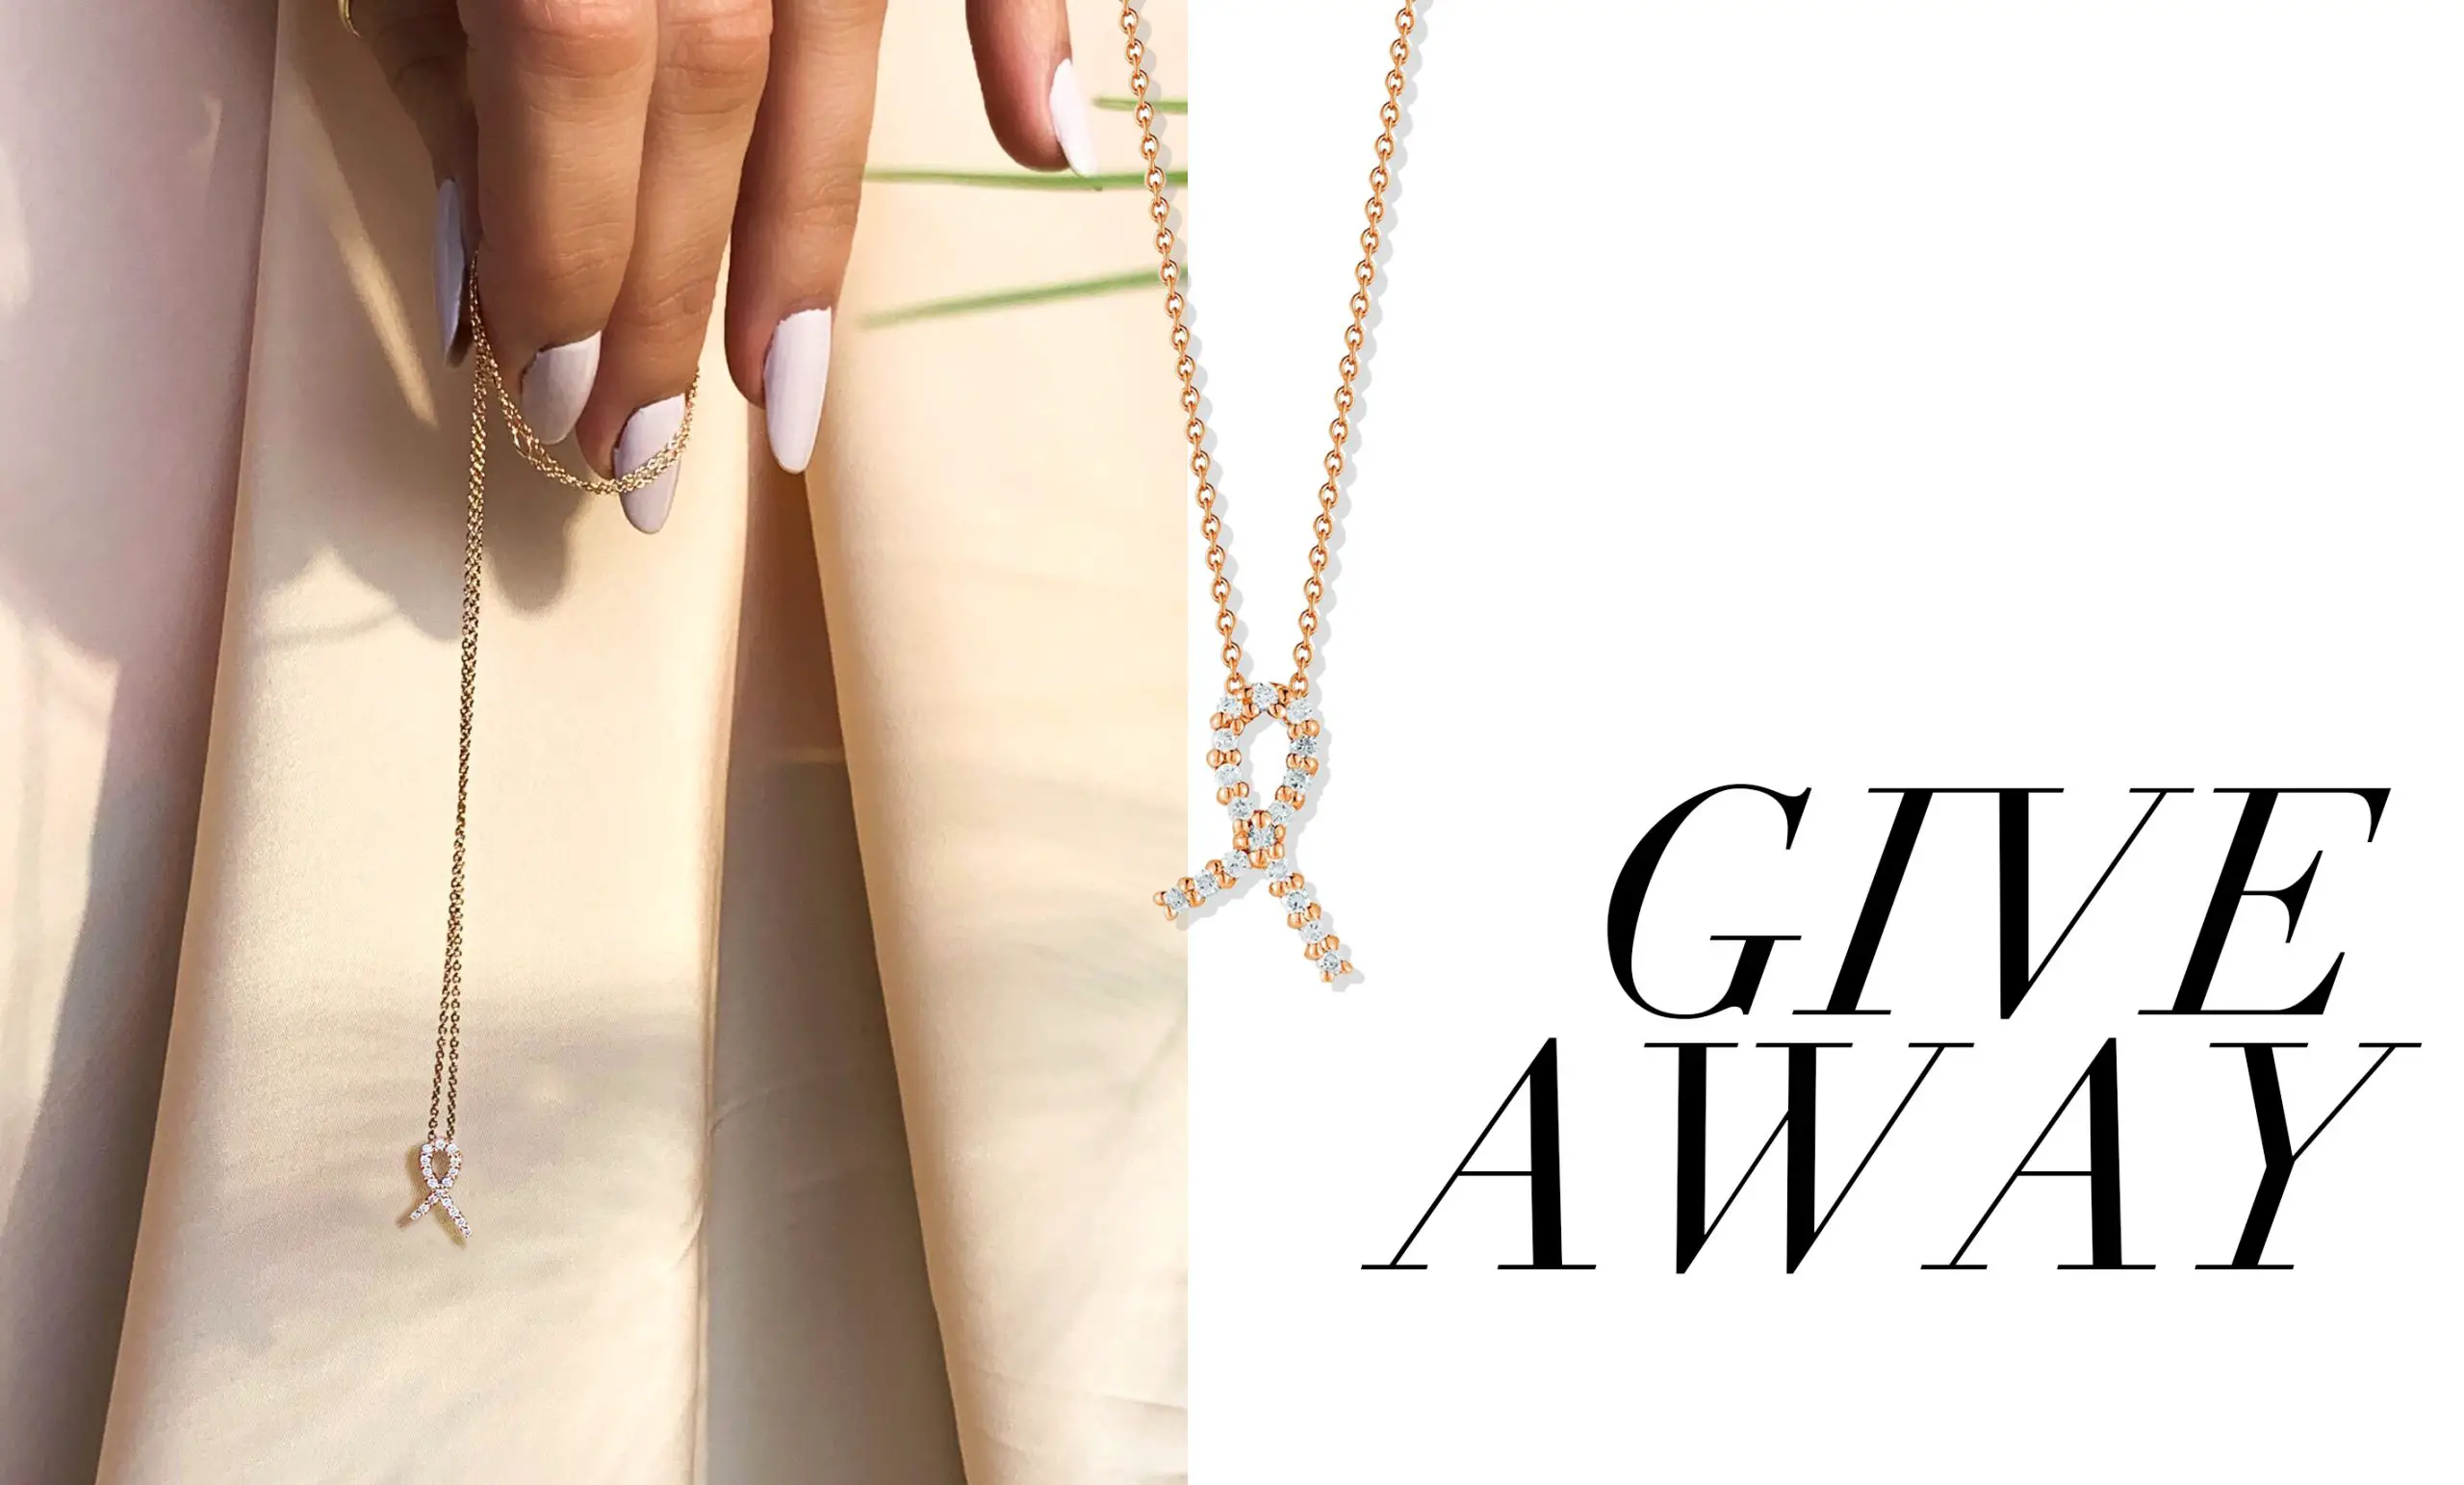 Enter for a chance to win a beautiful Roberto Coin Diamond Ribbon Necklace ($680 value) in your choice of 18k rose, yellow, or white gold in honor of Breast Cancer Awareness. 